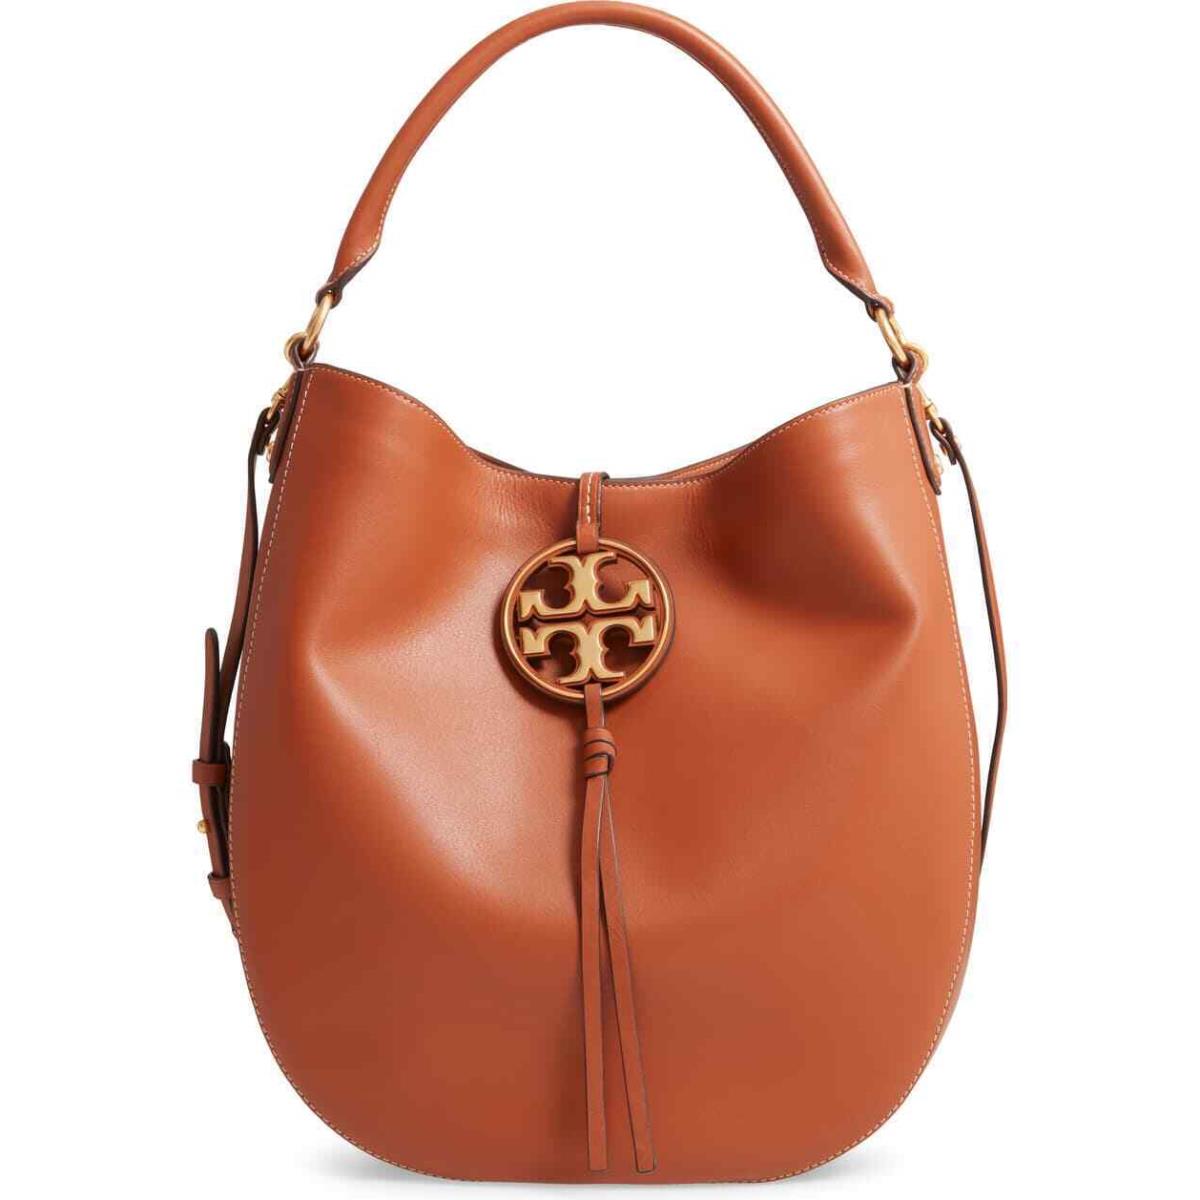 Tory Burch Miller Metal Slouchy Leather Hobo Bag Aged Camello Tan - Tory  Burch bag - 192485269635 | Fash Brands